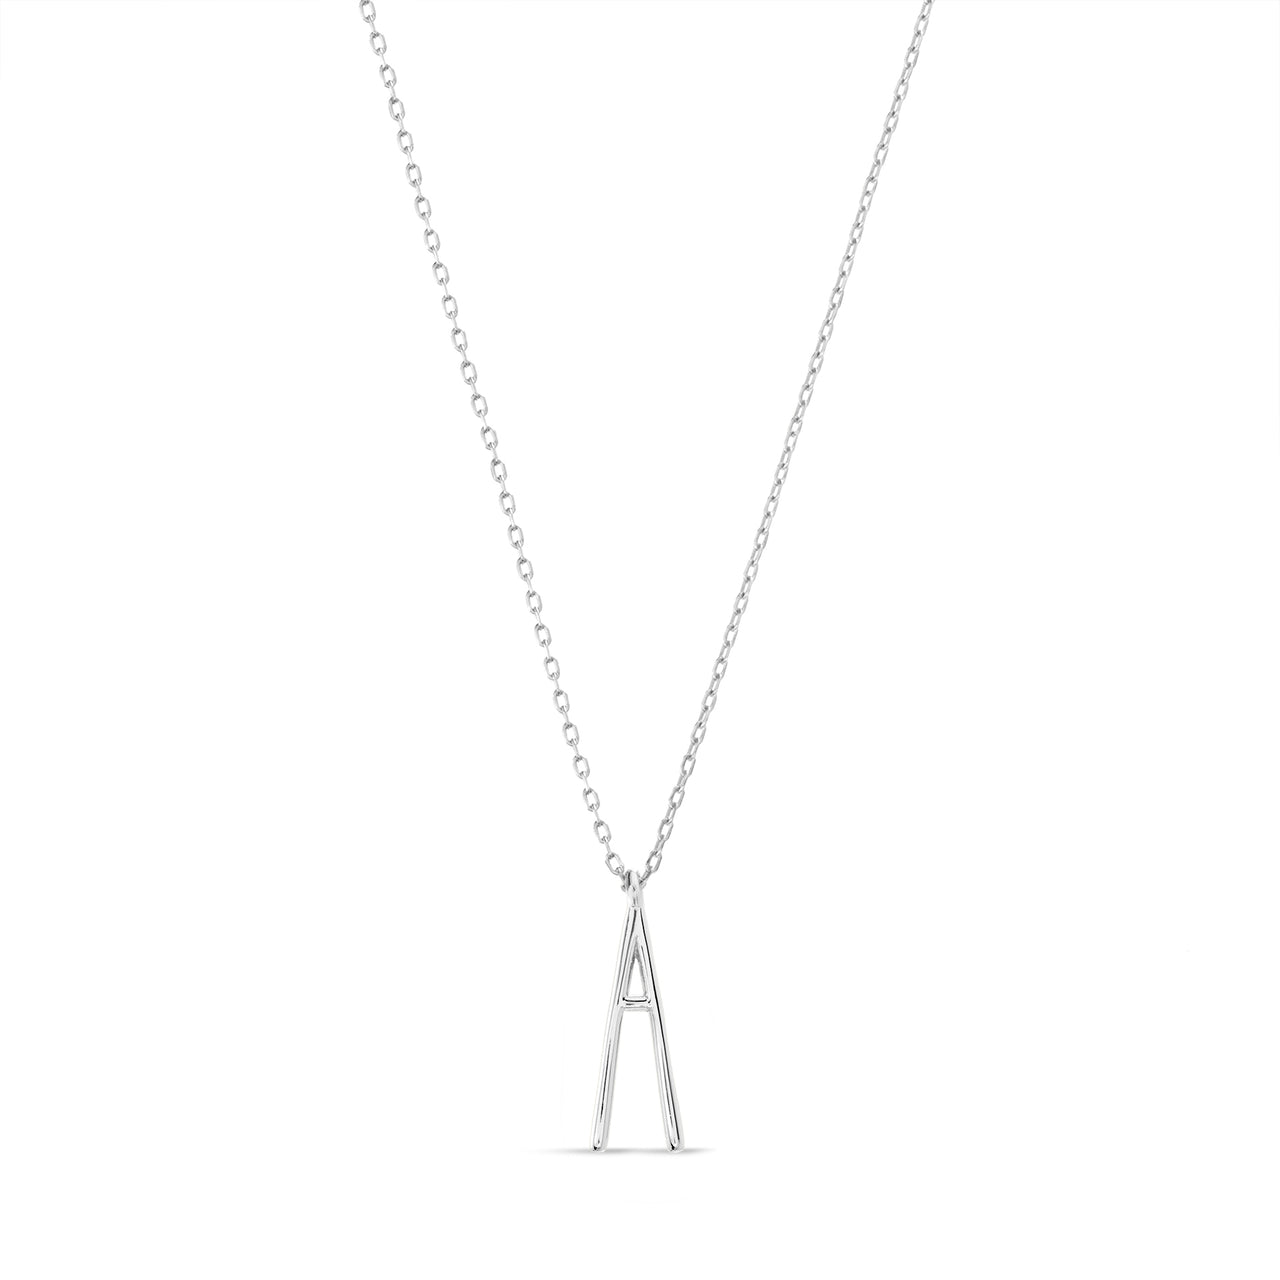 Rae Dunn Initial Station Cable Chain Necklace in Sterling Silver